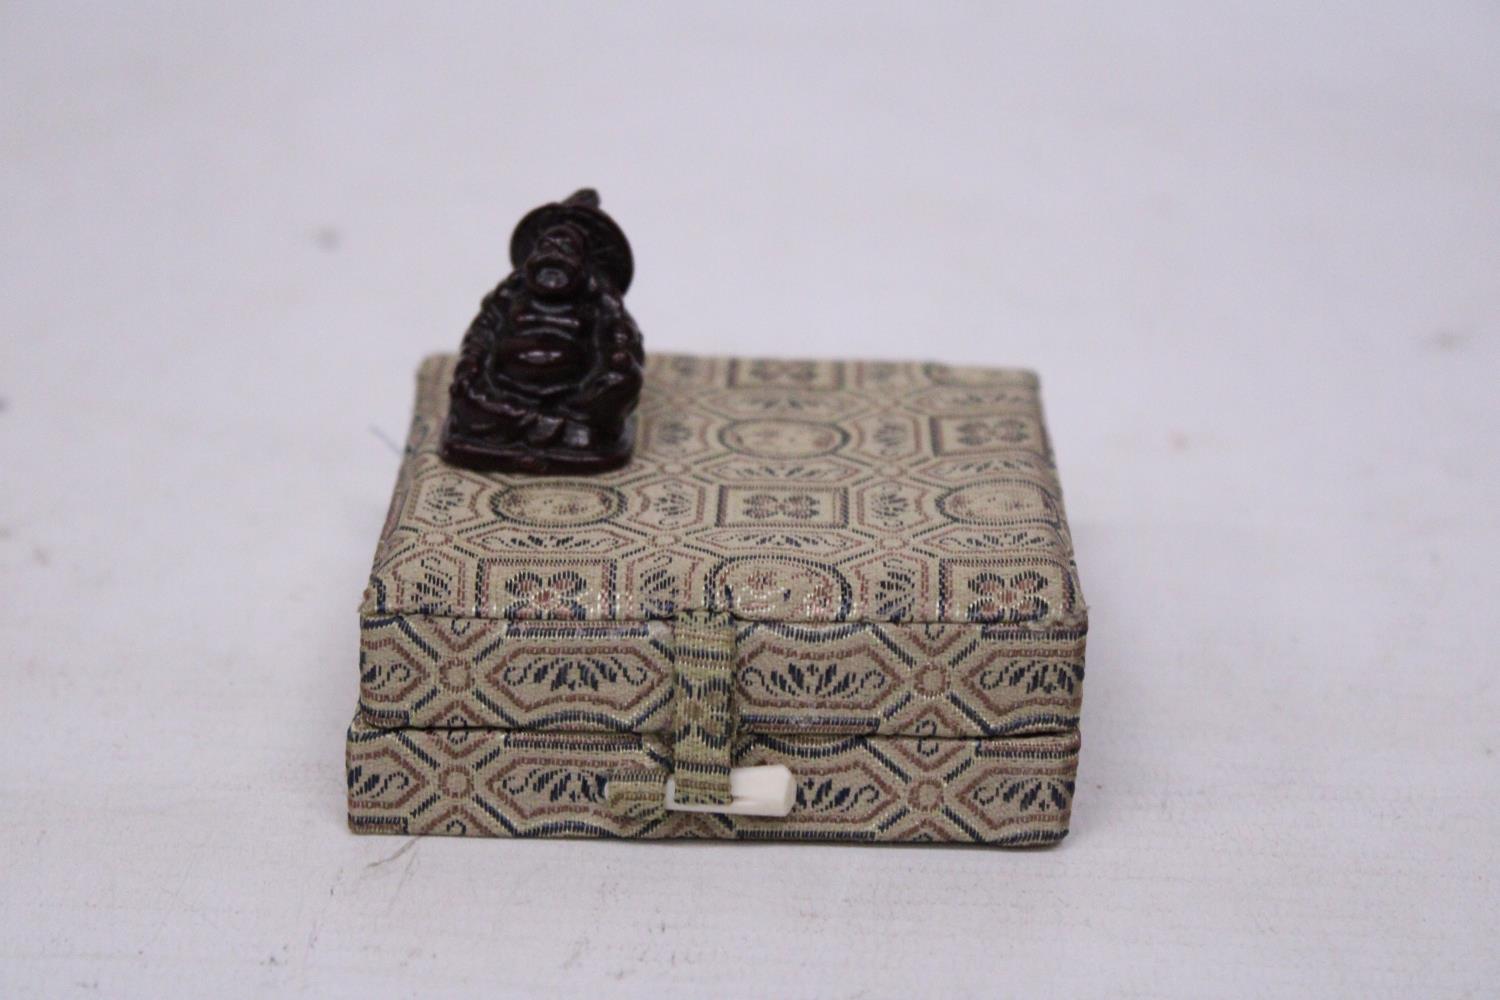 A BOXED BRONZE MEDAL "GREAT WALL OF CHINA" WITH A MINIATURE BUDDAH - Bild 5 aus 5